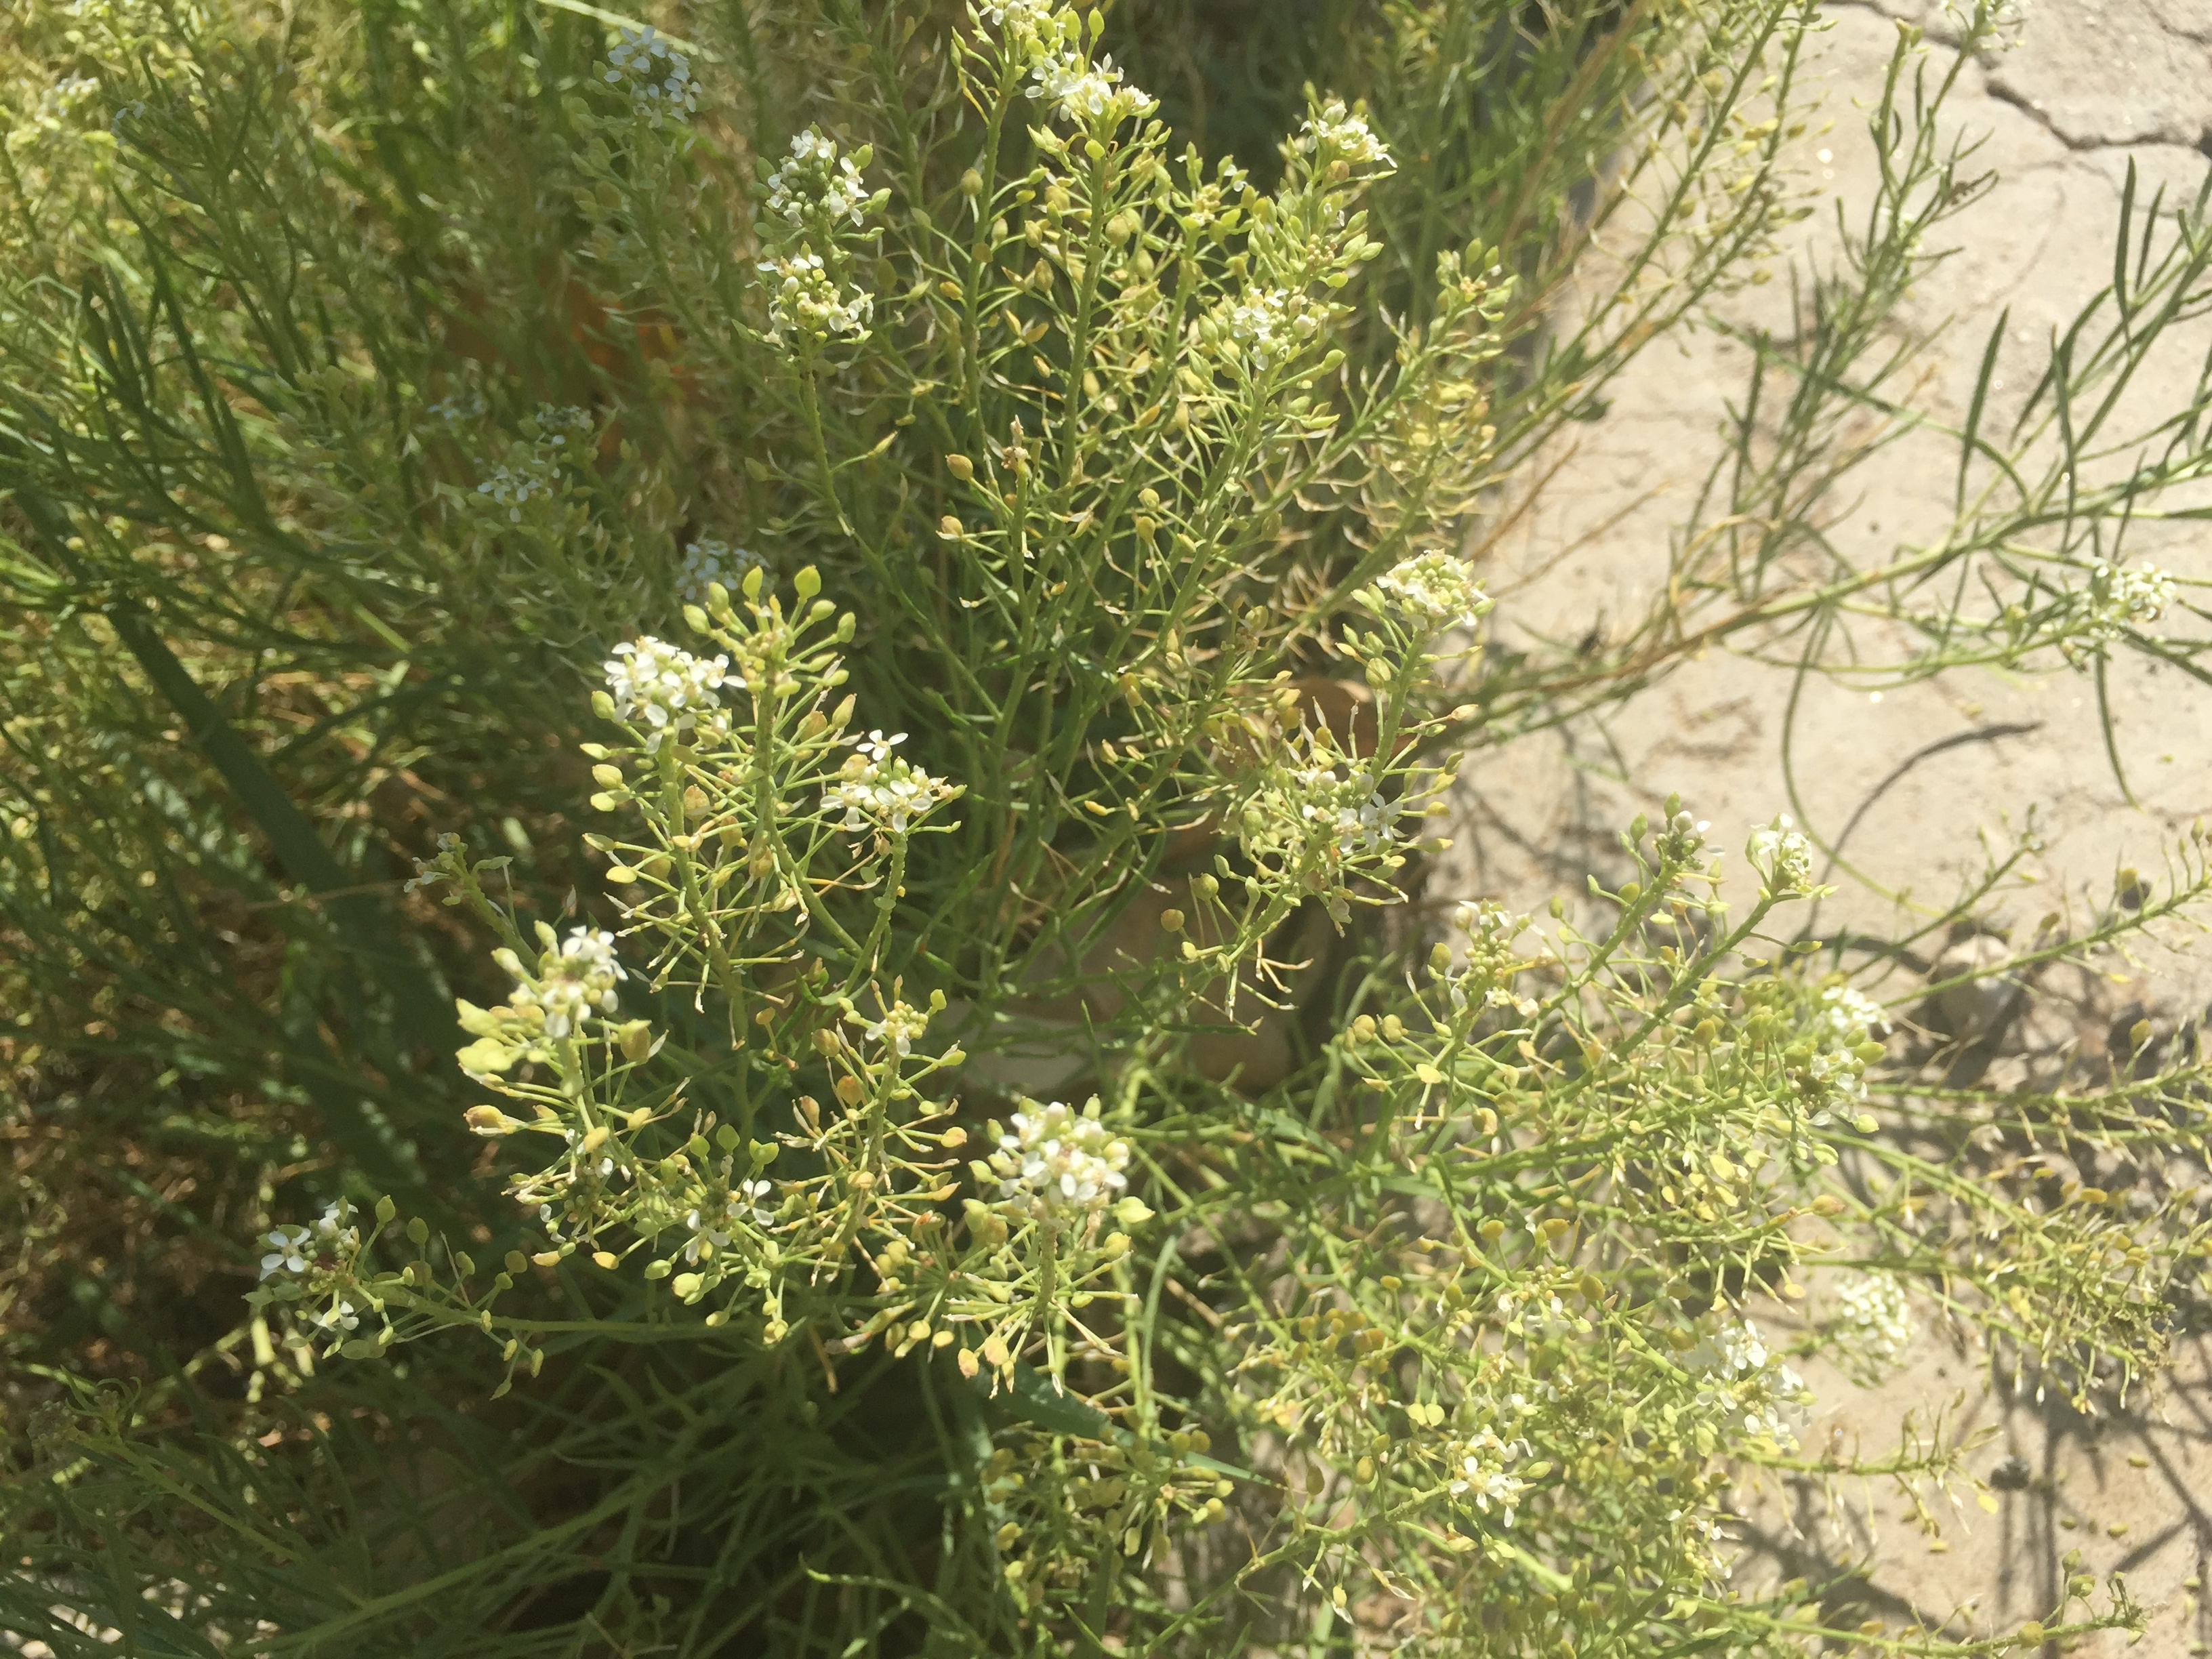 Inflorescence with small white flowers and some new seeds